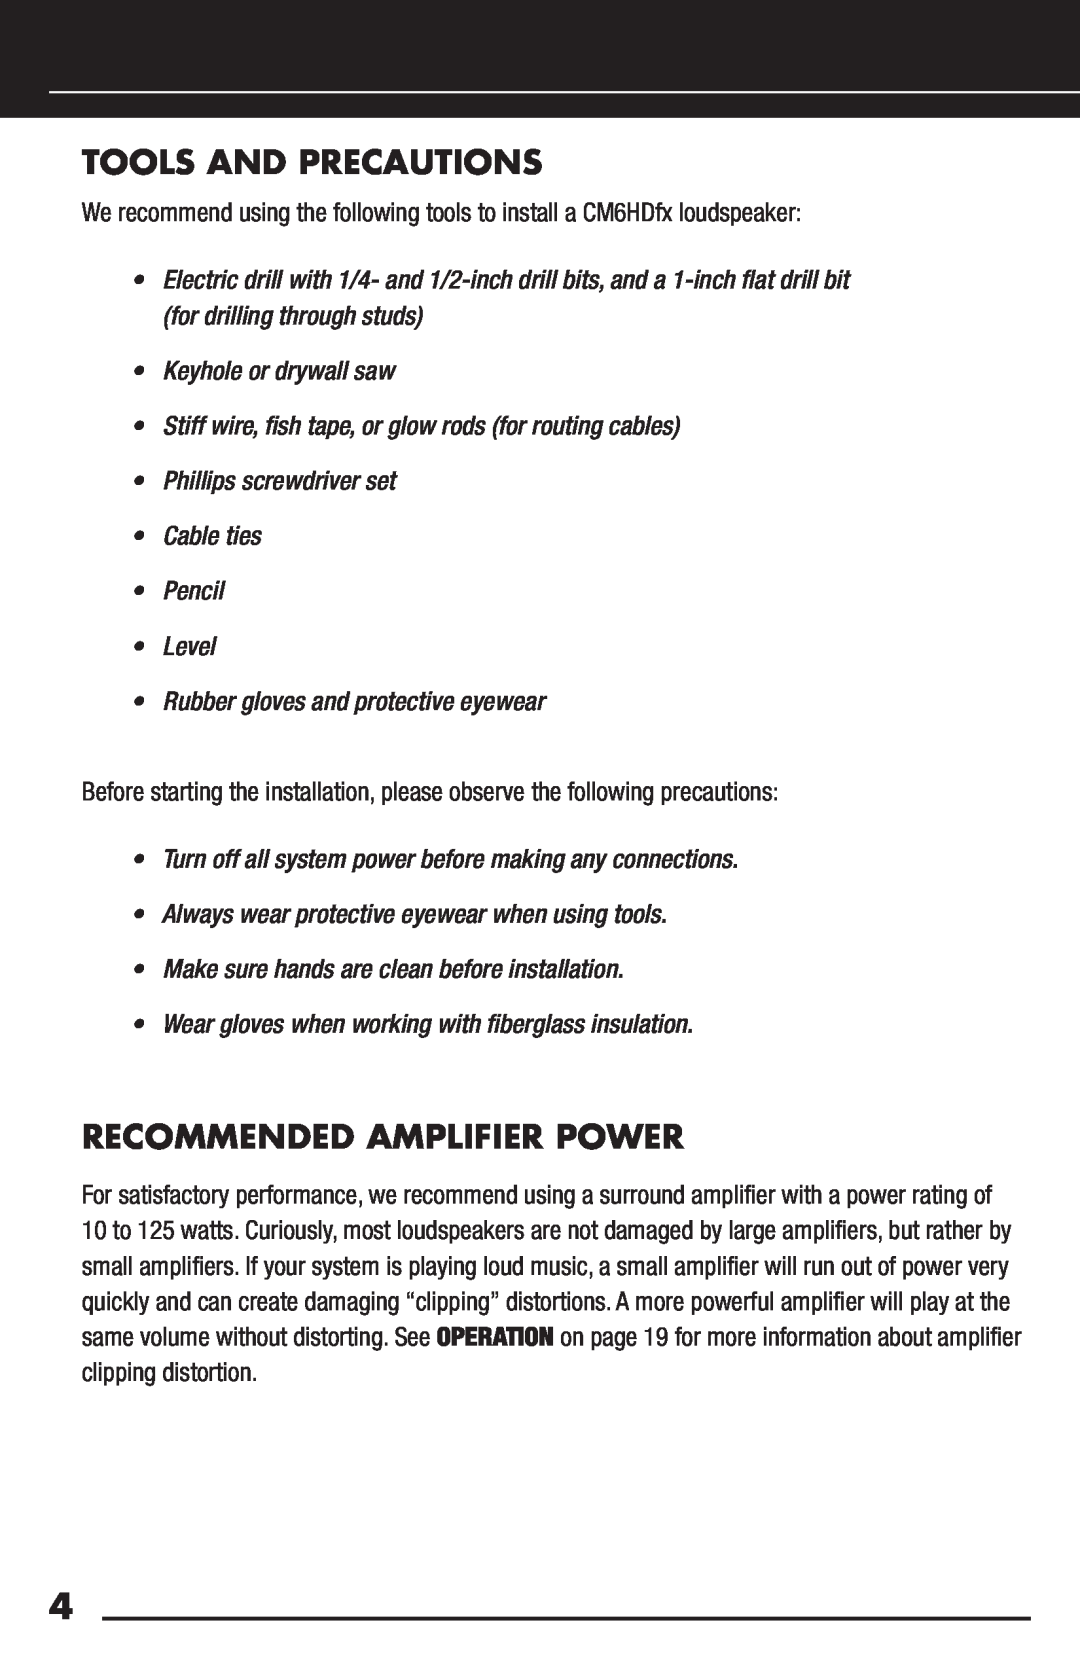 Niles Audio CM6HDFX manual Tools And Precautions, Recommended Amplifier Power 